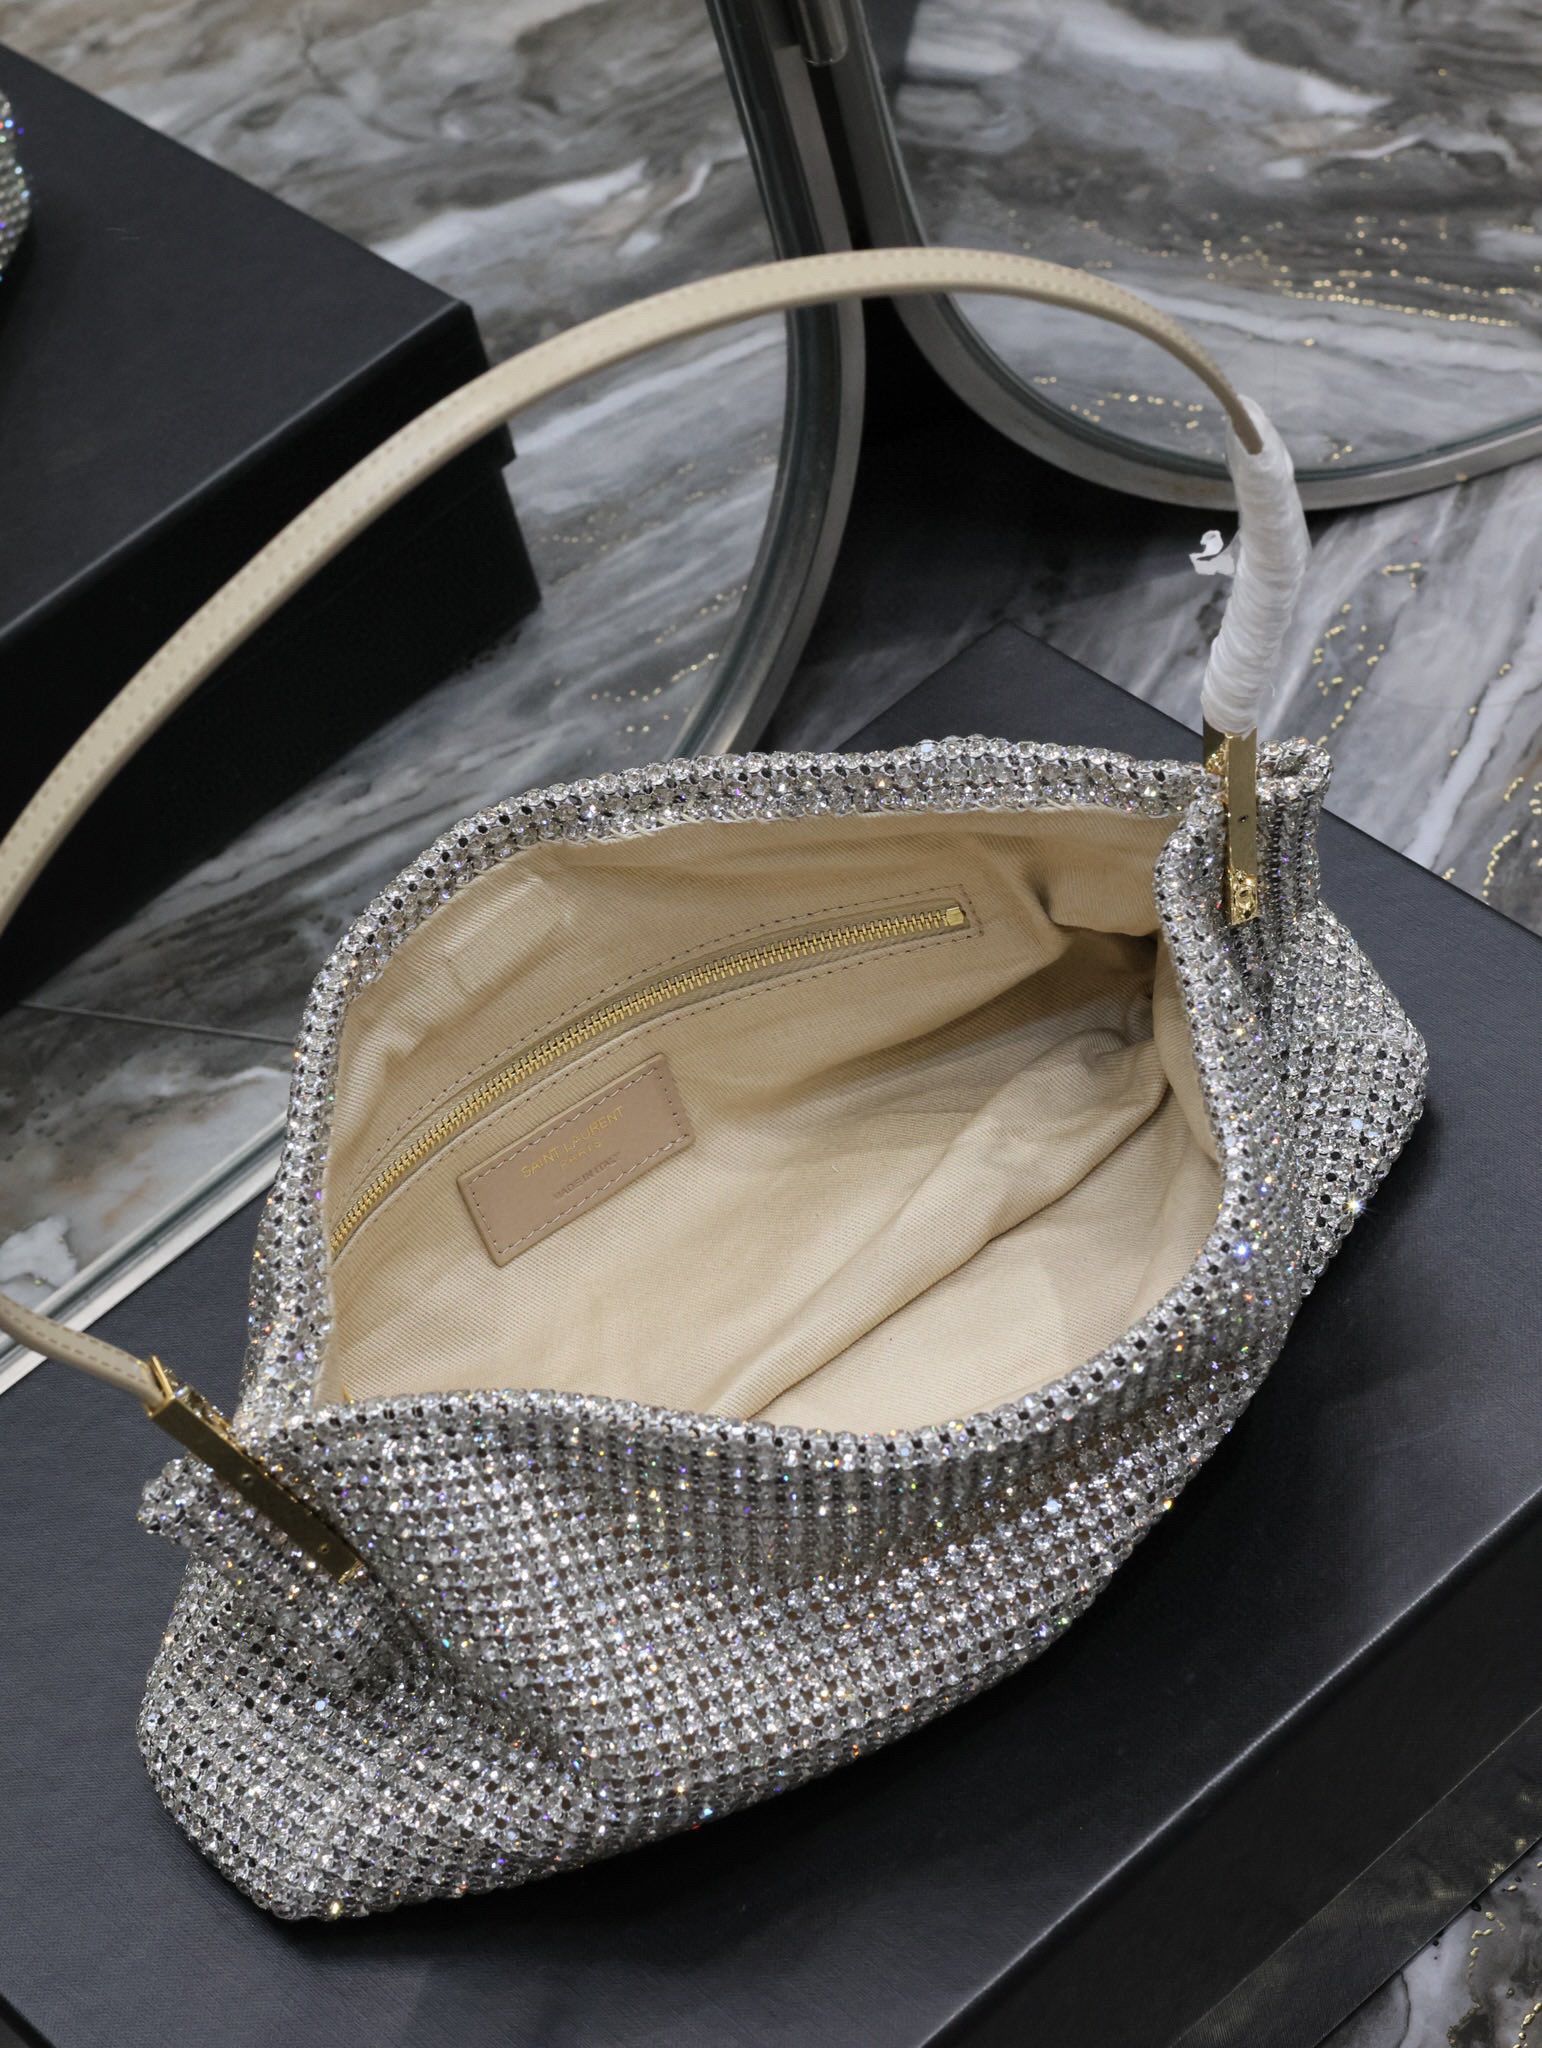 Yves Saint Laurent Suzanne Small In Rhinestones Mesh And Satin Shoulder Bag 741637 Silver